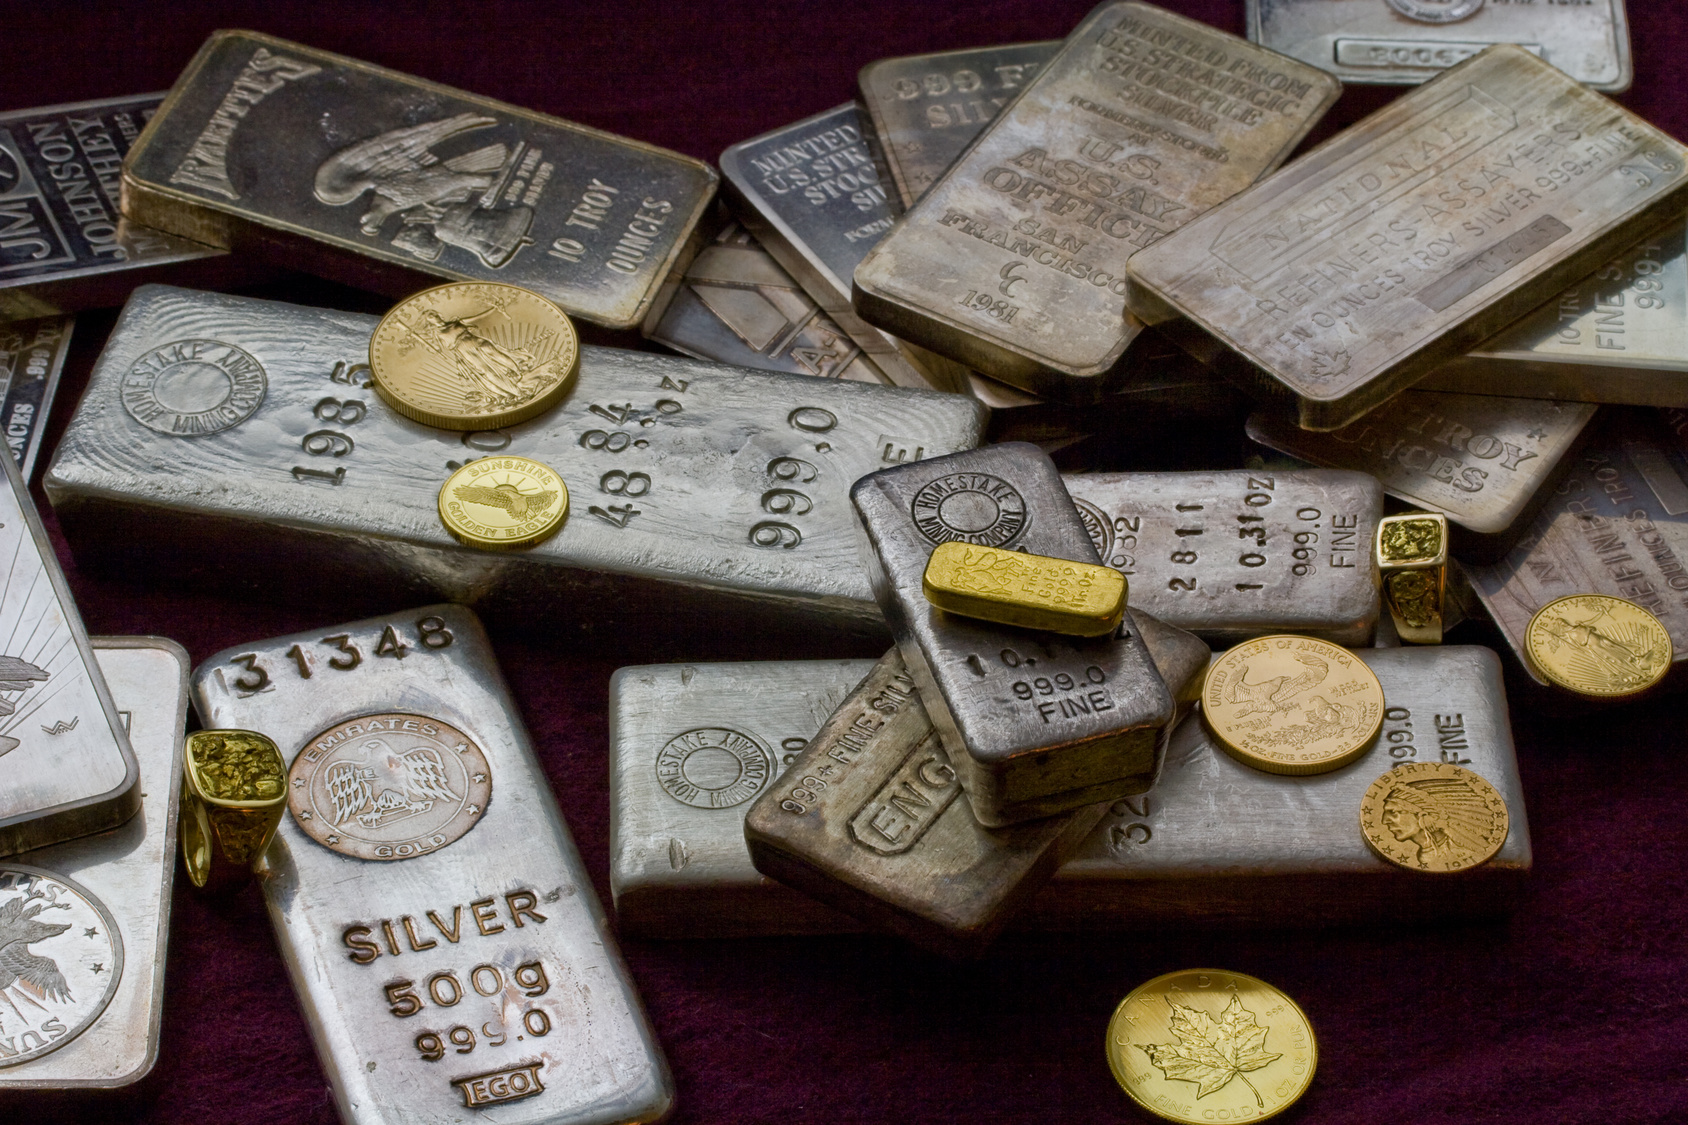 Demand for physical silver is surging and the U.S. Mint can’t keep up